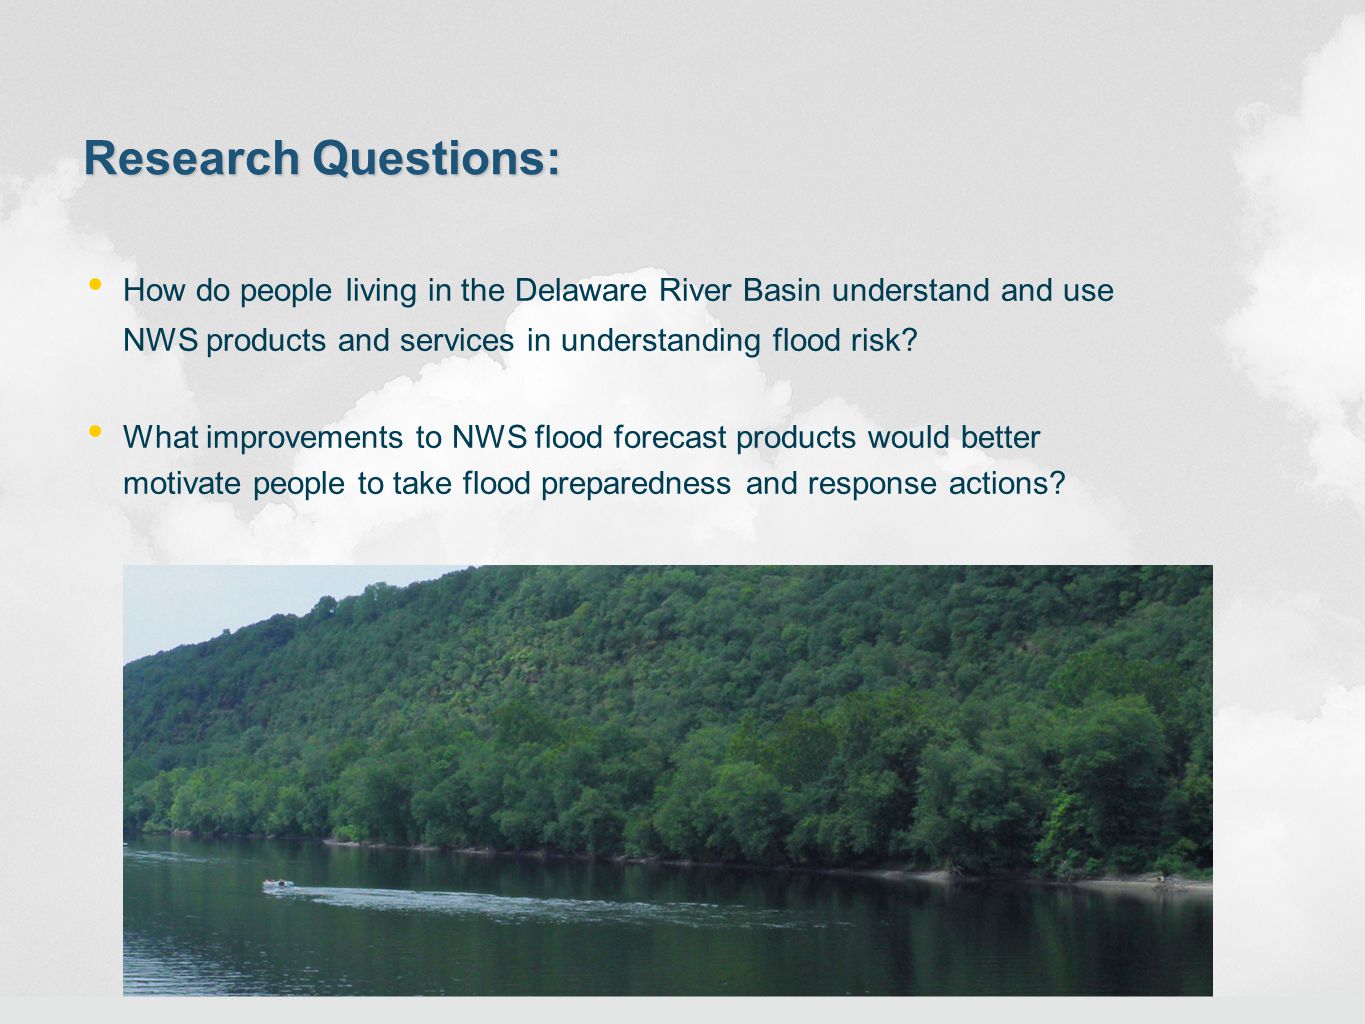 Research Questions: How do people living in the Delaware River Basin understand and use NWS products and services in understanding flood risk.